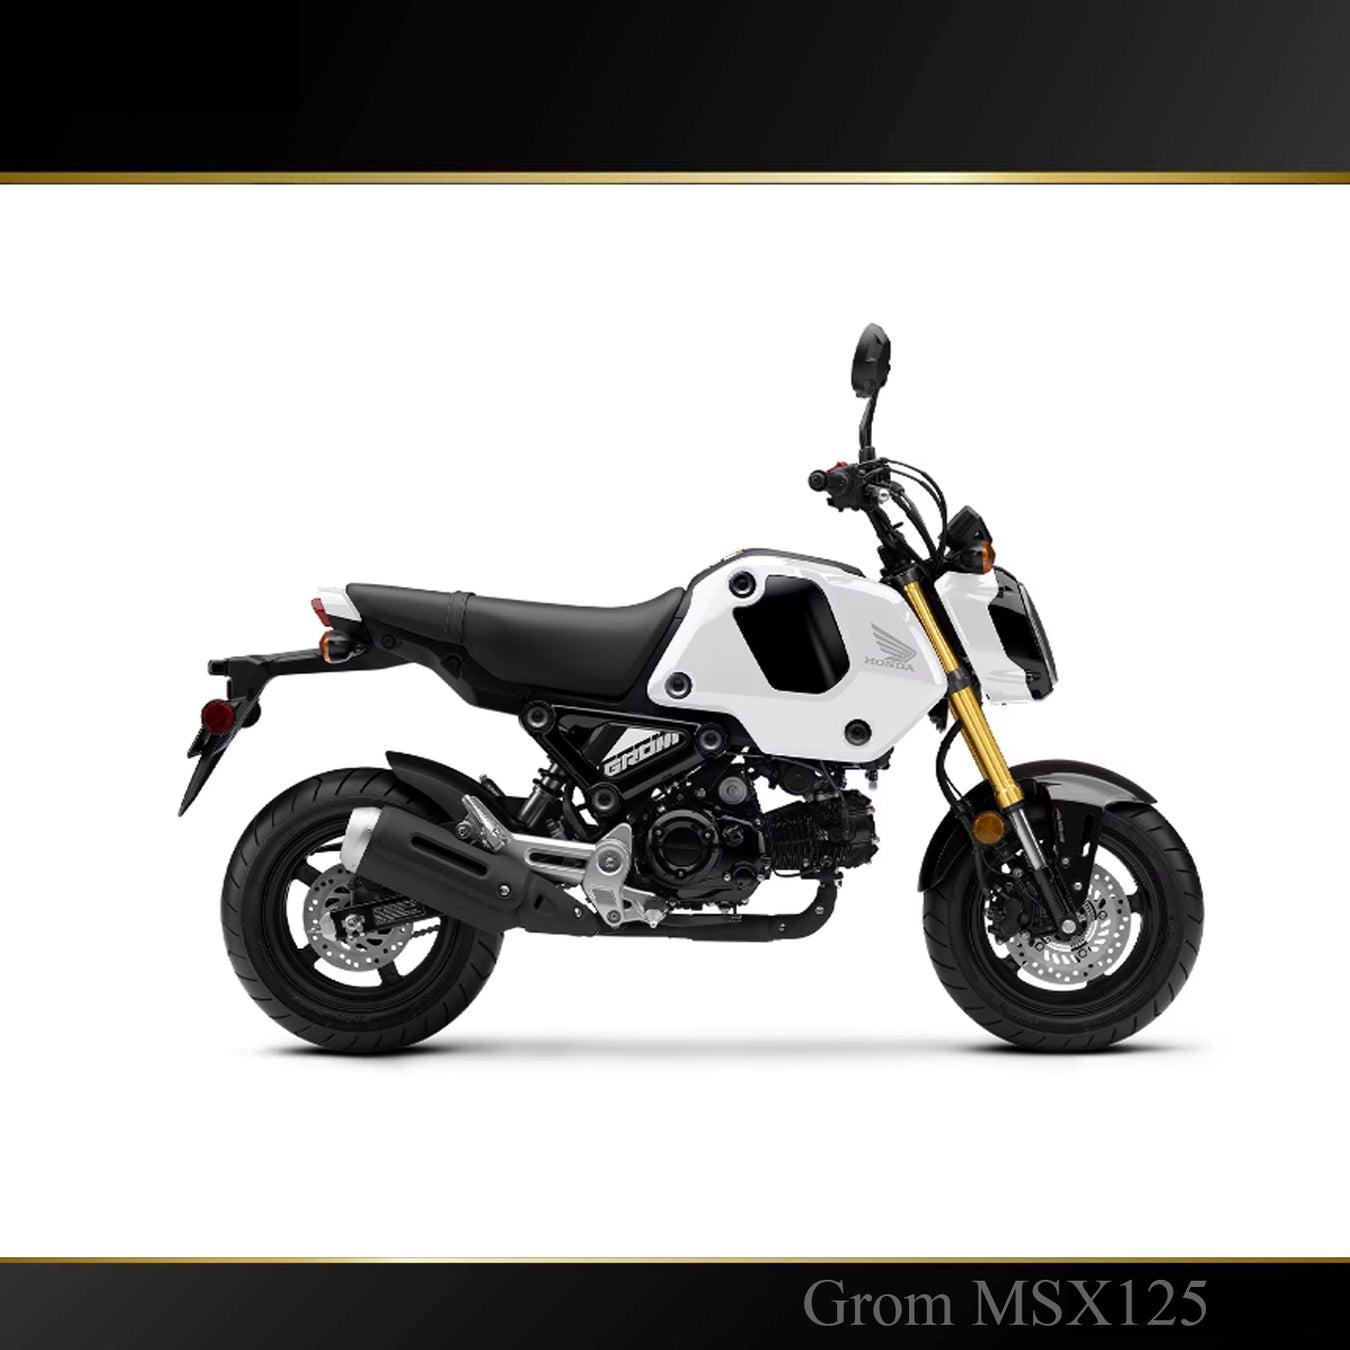 Honda Grom MSX 125 Parts and Accessories